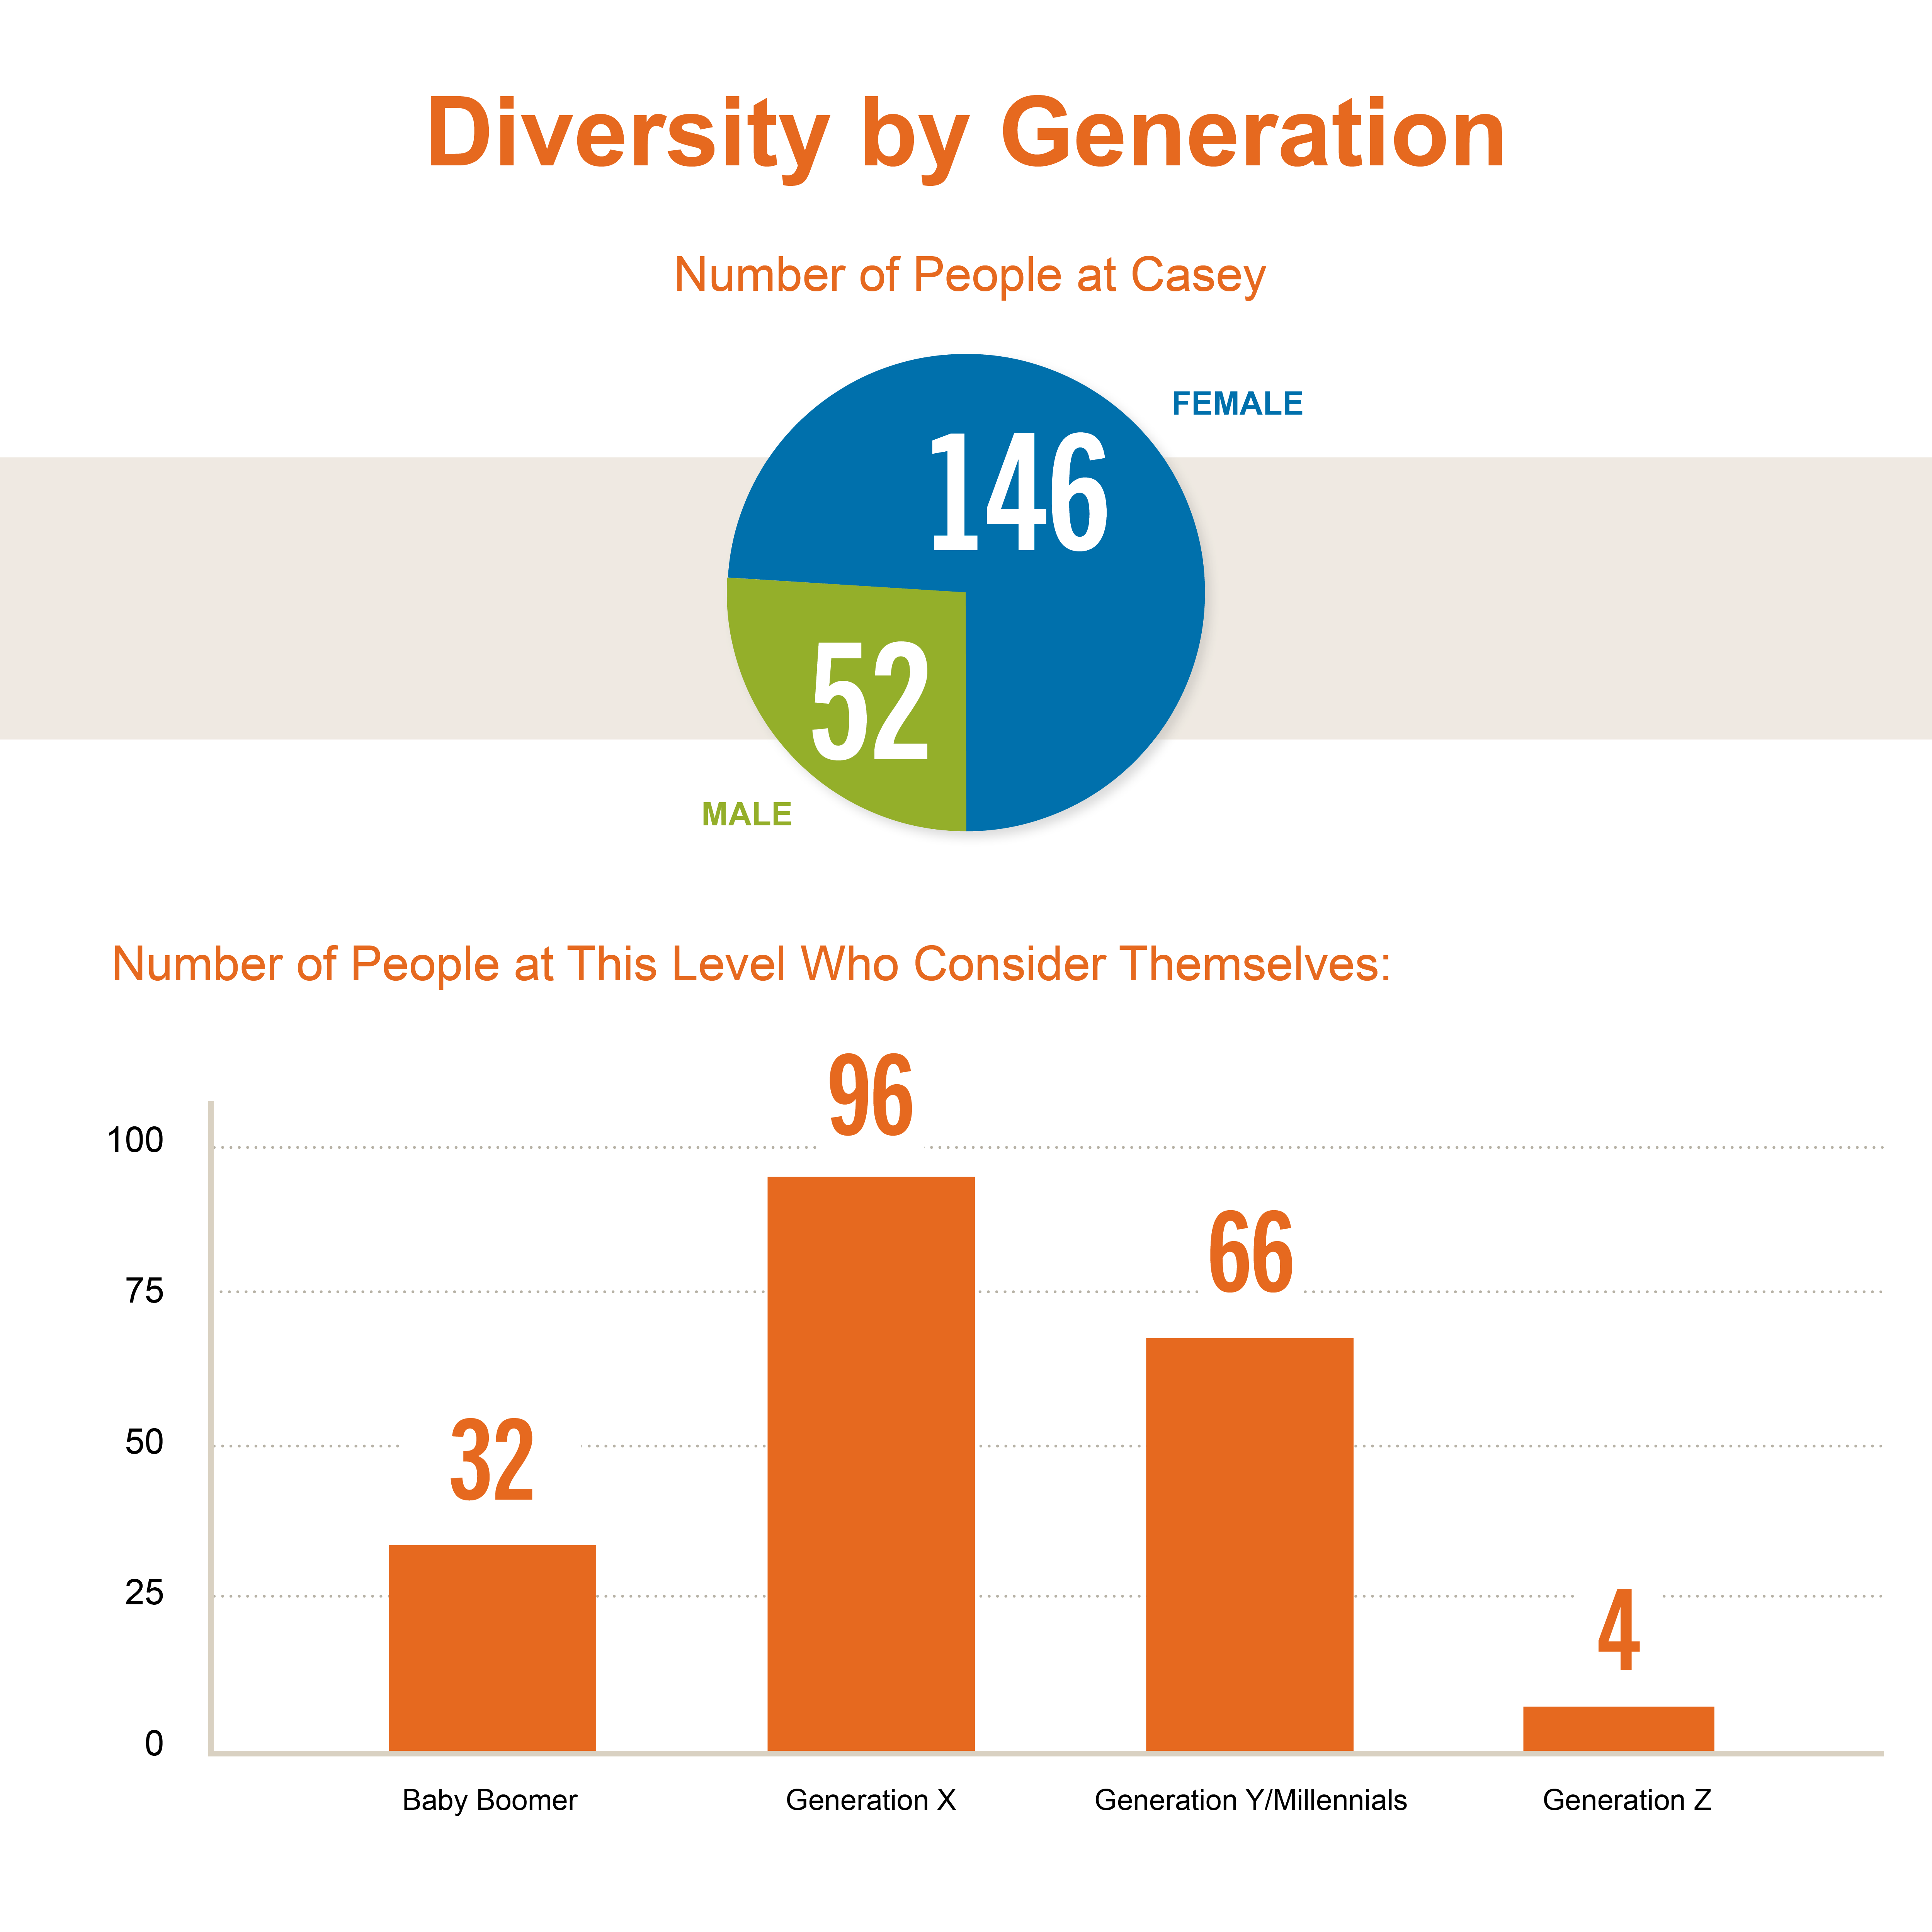 Diversity by generation, number of people at Casey